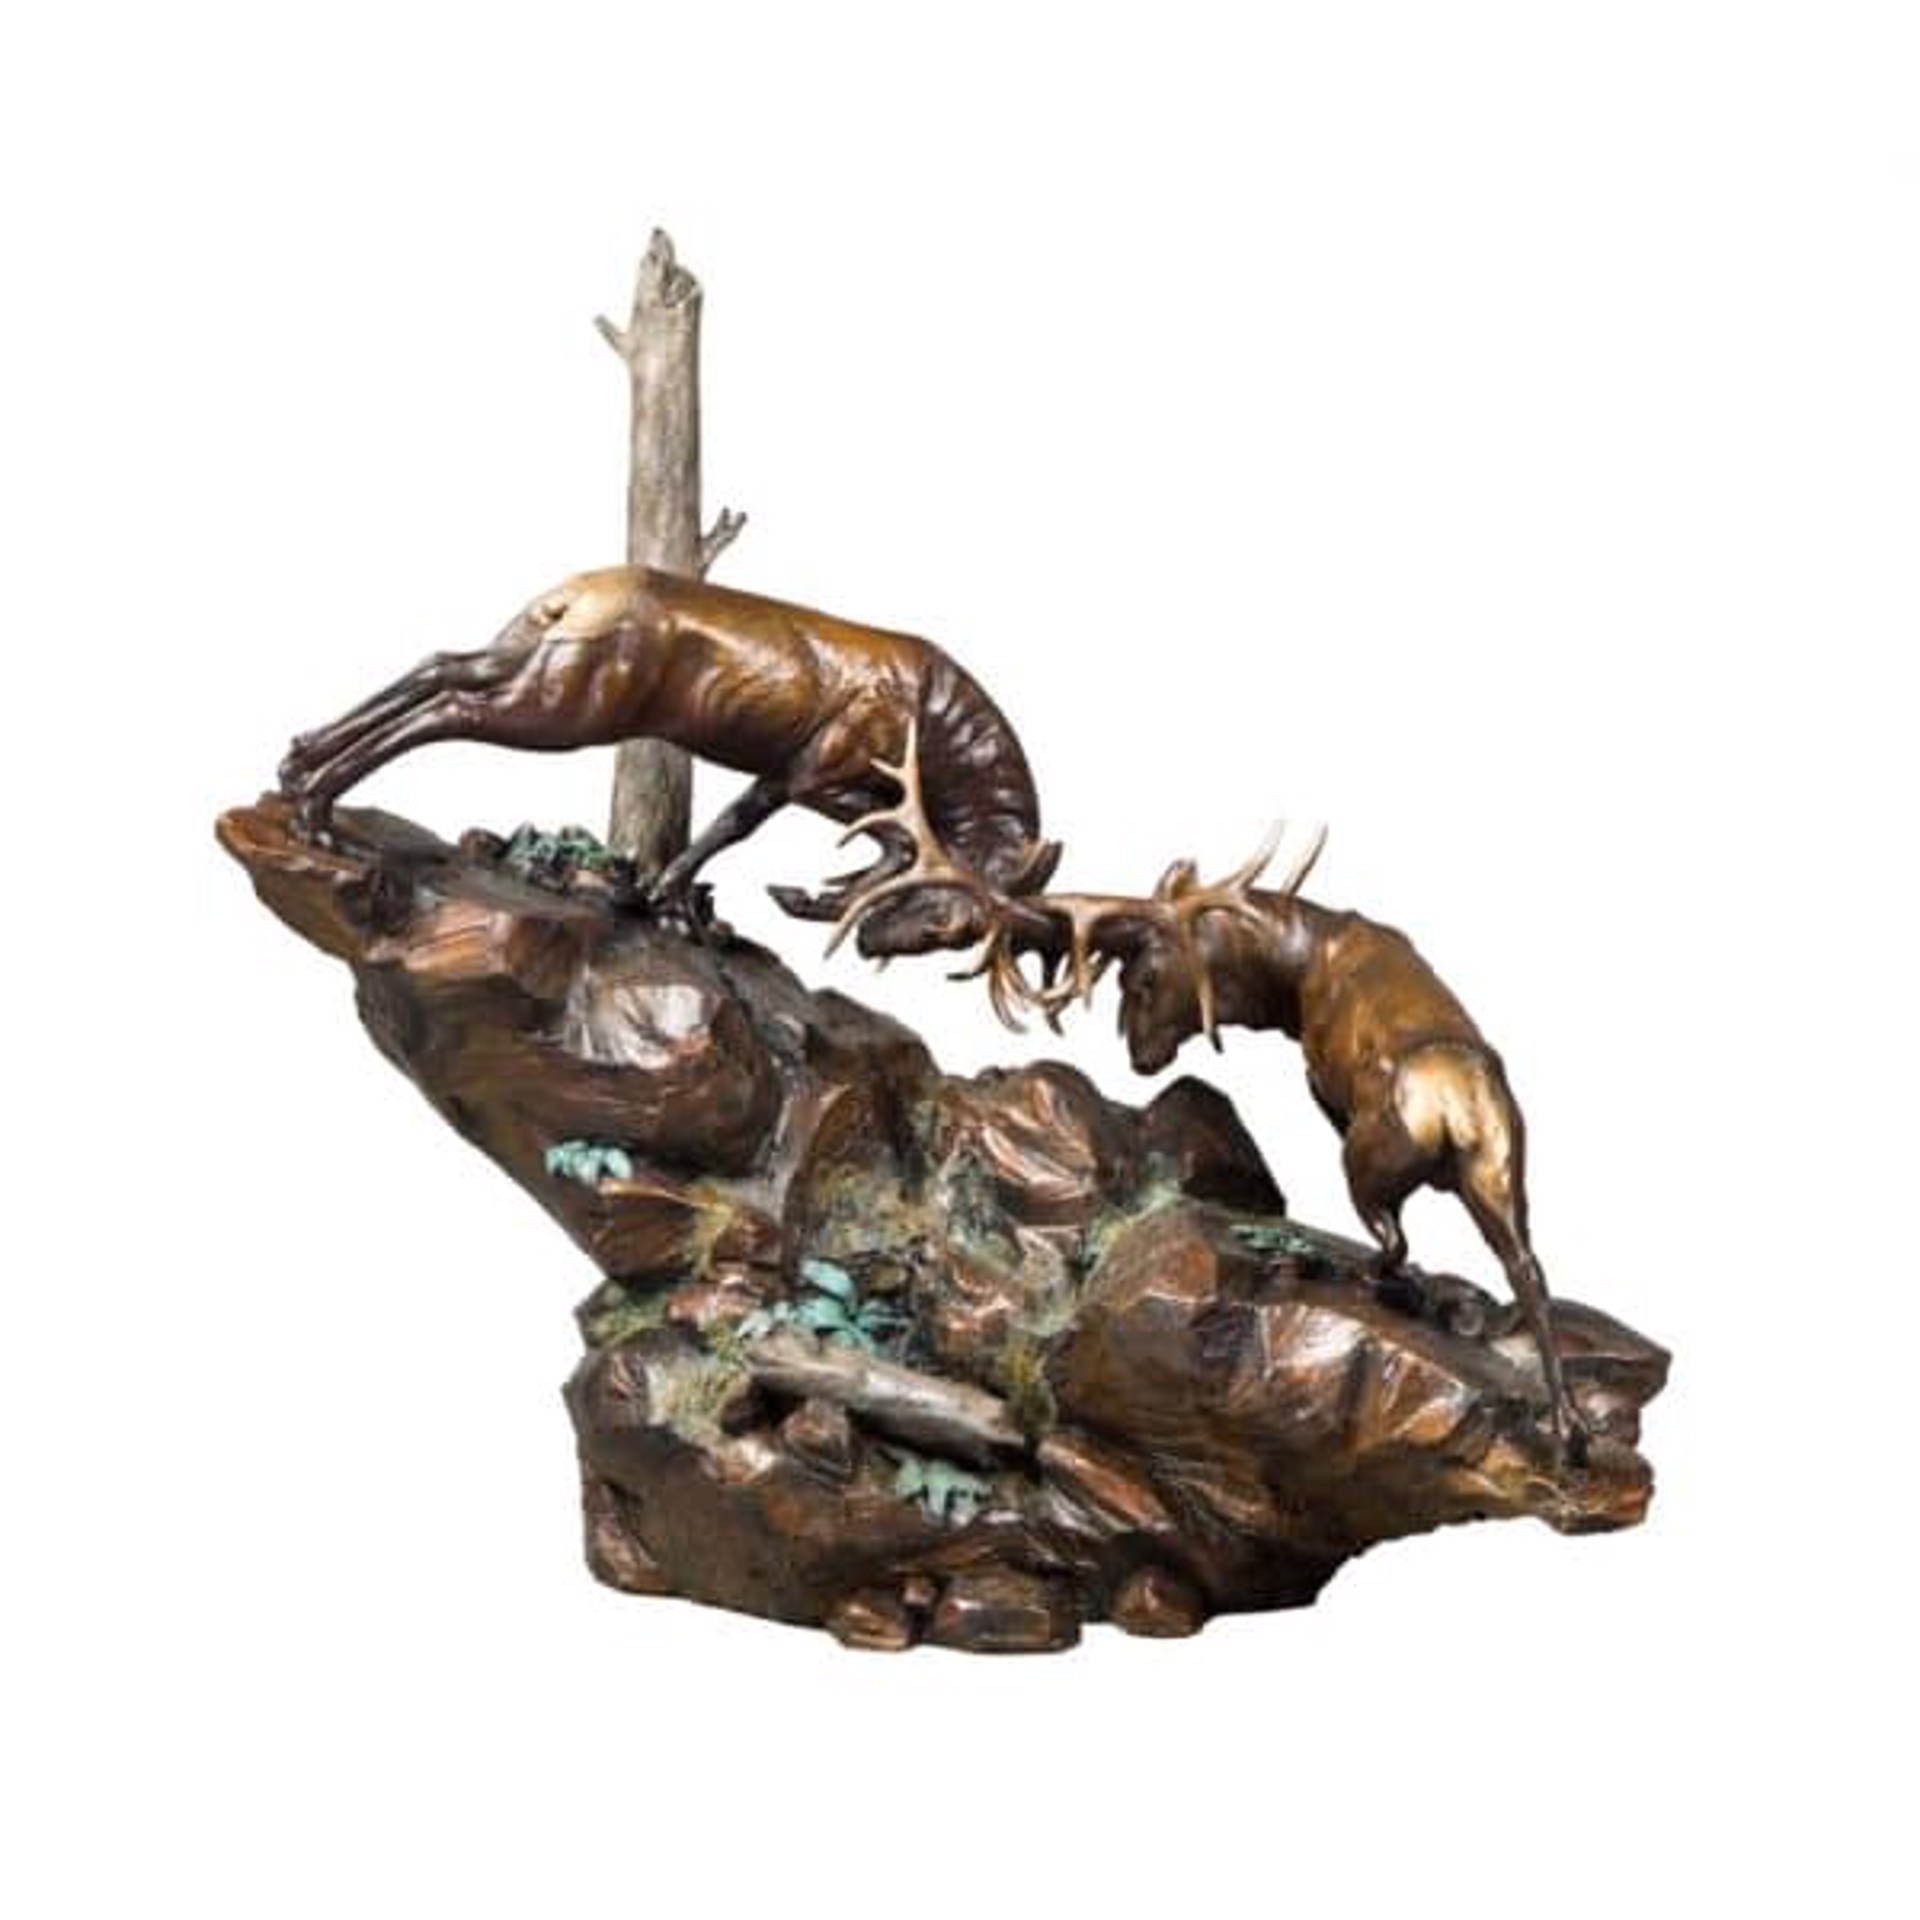 A Bronze Sculpture Of Two Bull Elk Fighting On Rock By Rip And Alison Caswell Available At Gallery Wild